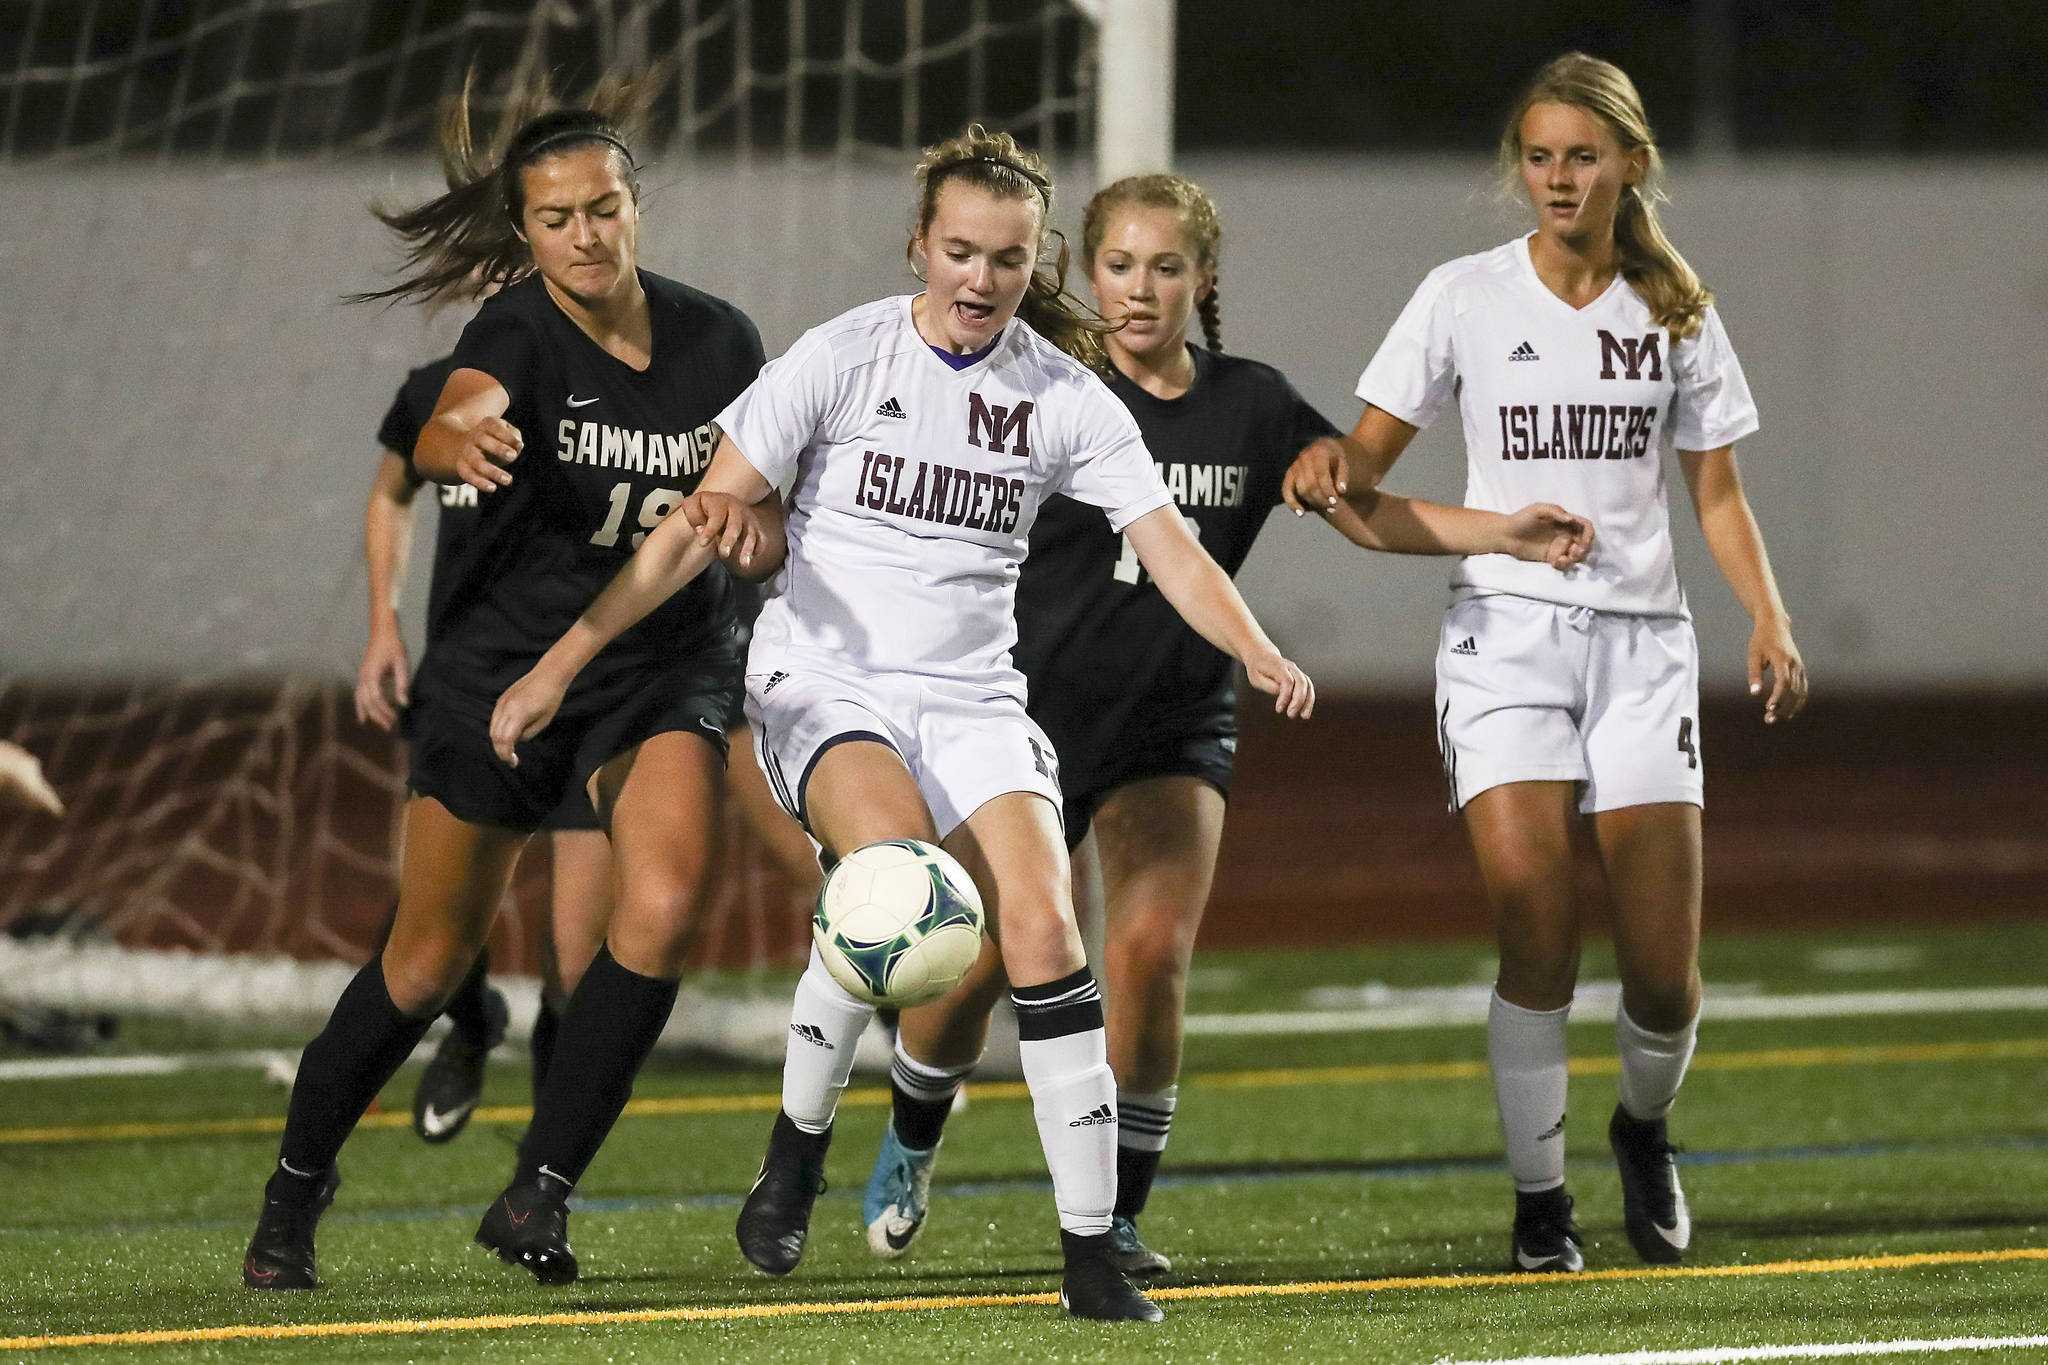 Photo courtesy of Rick Edelman/Rick Edelman Photography                                The Mercer Island Islanders girls soccer team captured a 2-0 win against the Interlake Saints on Oct. 17. The Islanders have an overall record of 10-1-1 and are in first place in the KingCo 3A/2A division. Liberty is in second place with a record of 9-2-1. Mercer Island player Kendall Riley (pictured) gains control of the ball in a game against the Sammamish Totems on Oct. 10. Mercer Island will host the Redmond Mustangs in their final regular season home game of the 2017 season at 7:30 p.m. on Oct. 24 at Mercer Island High School.